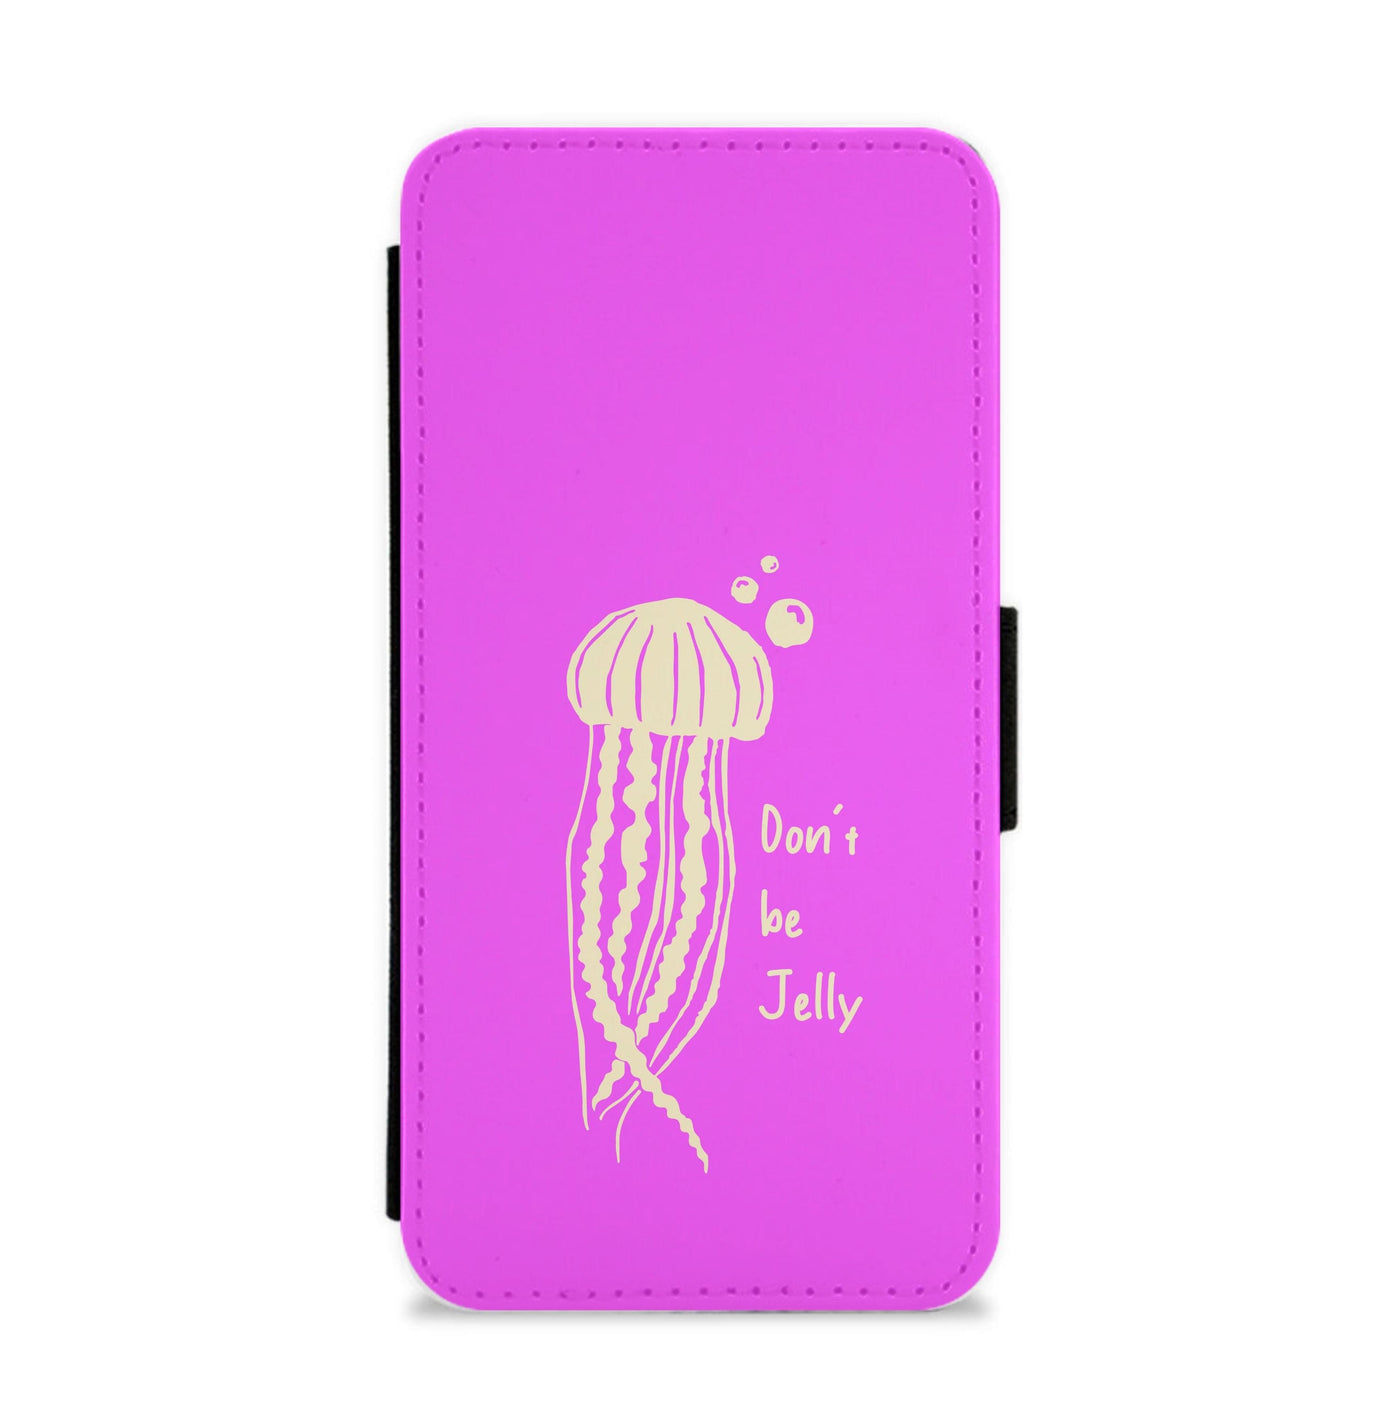 Don't Be Jelly - Sealife Flip / Wallet Phone Case